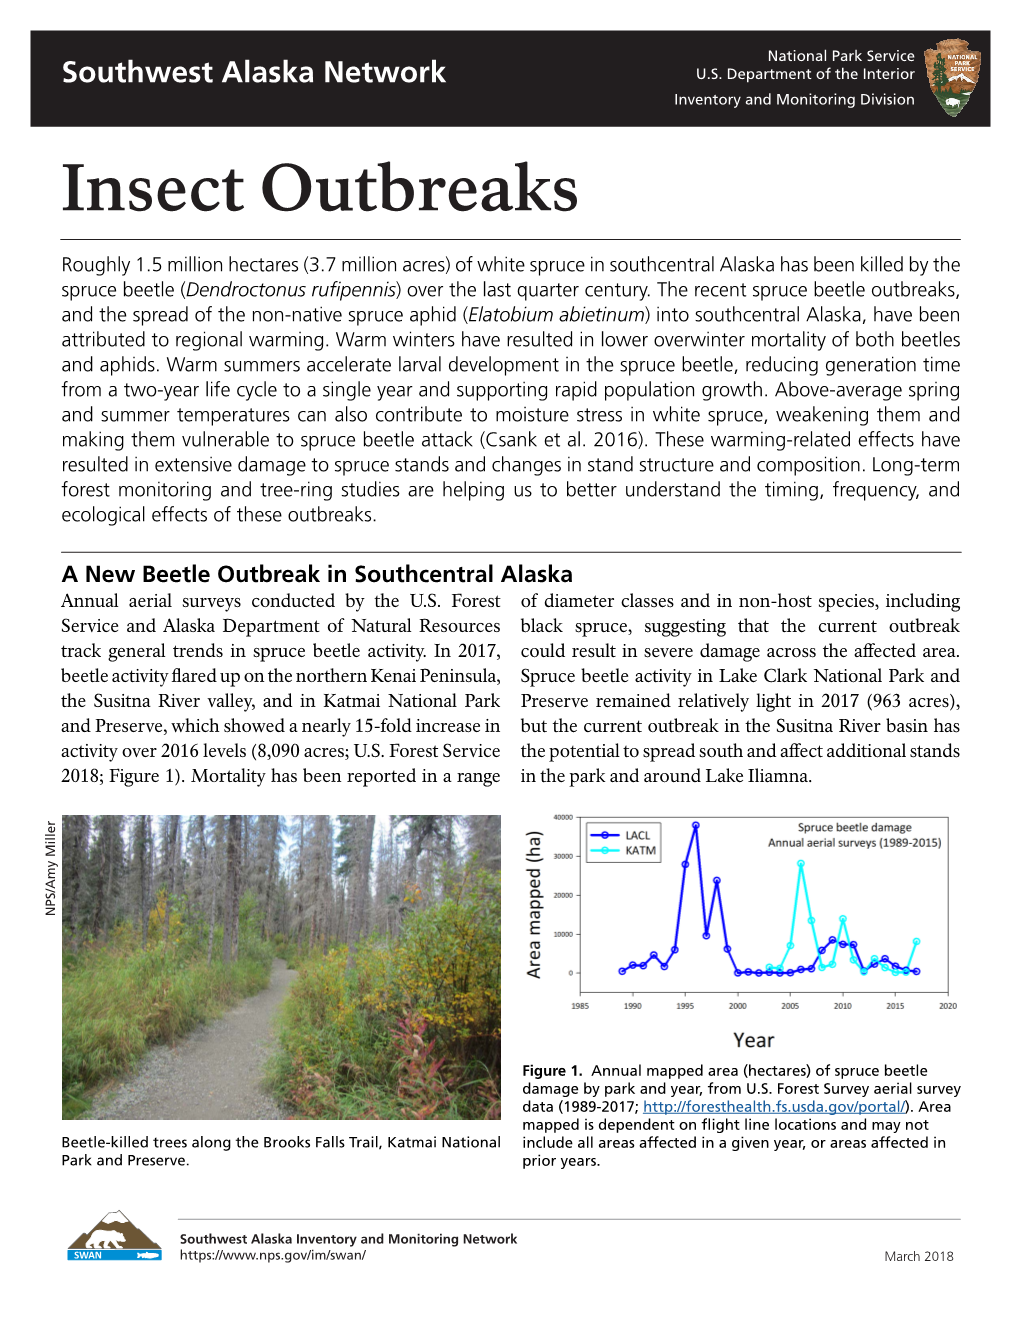 Insect Outbreaks